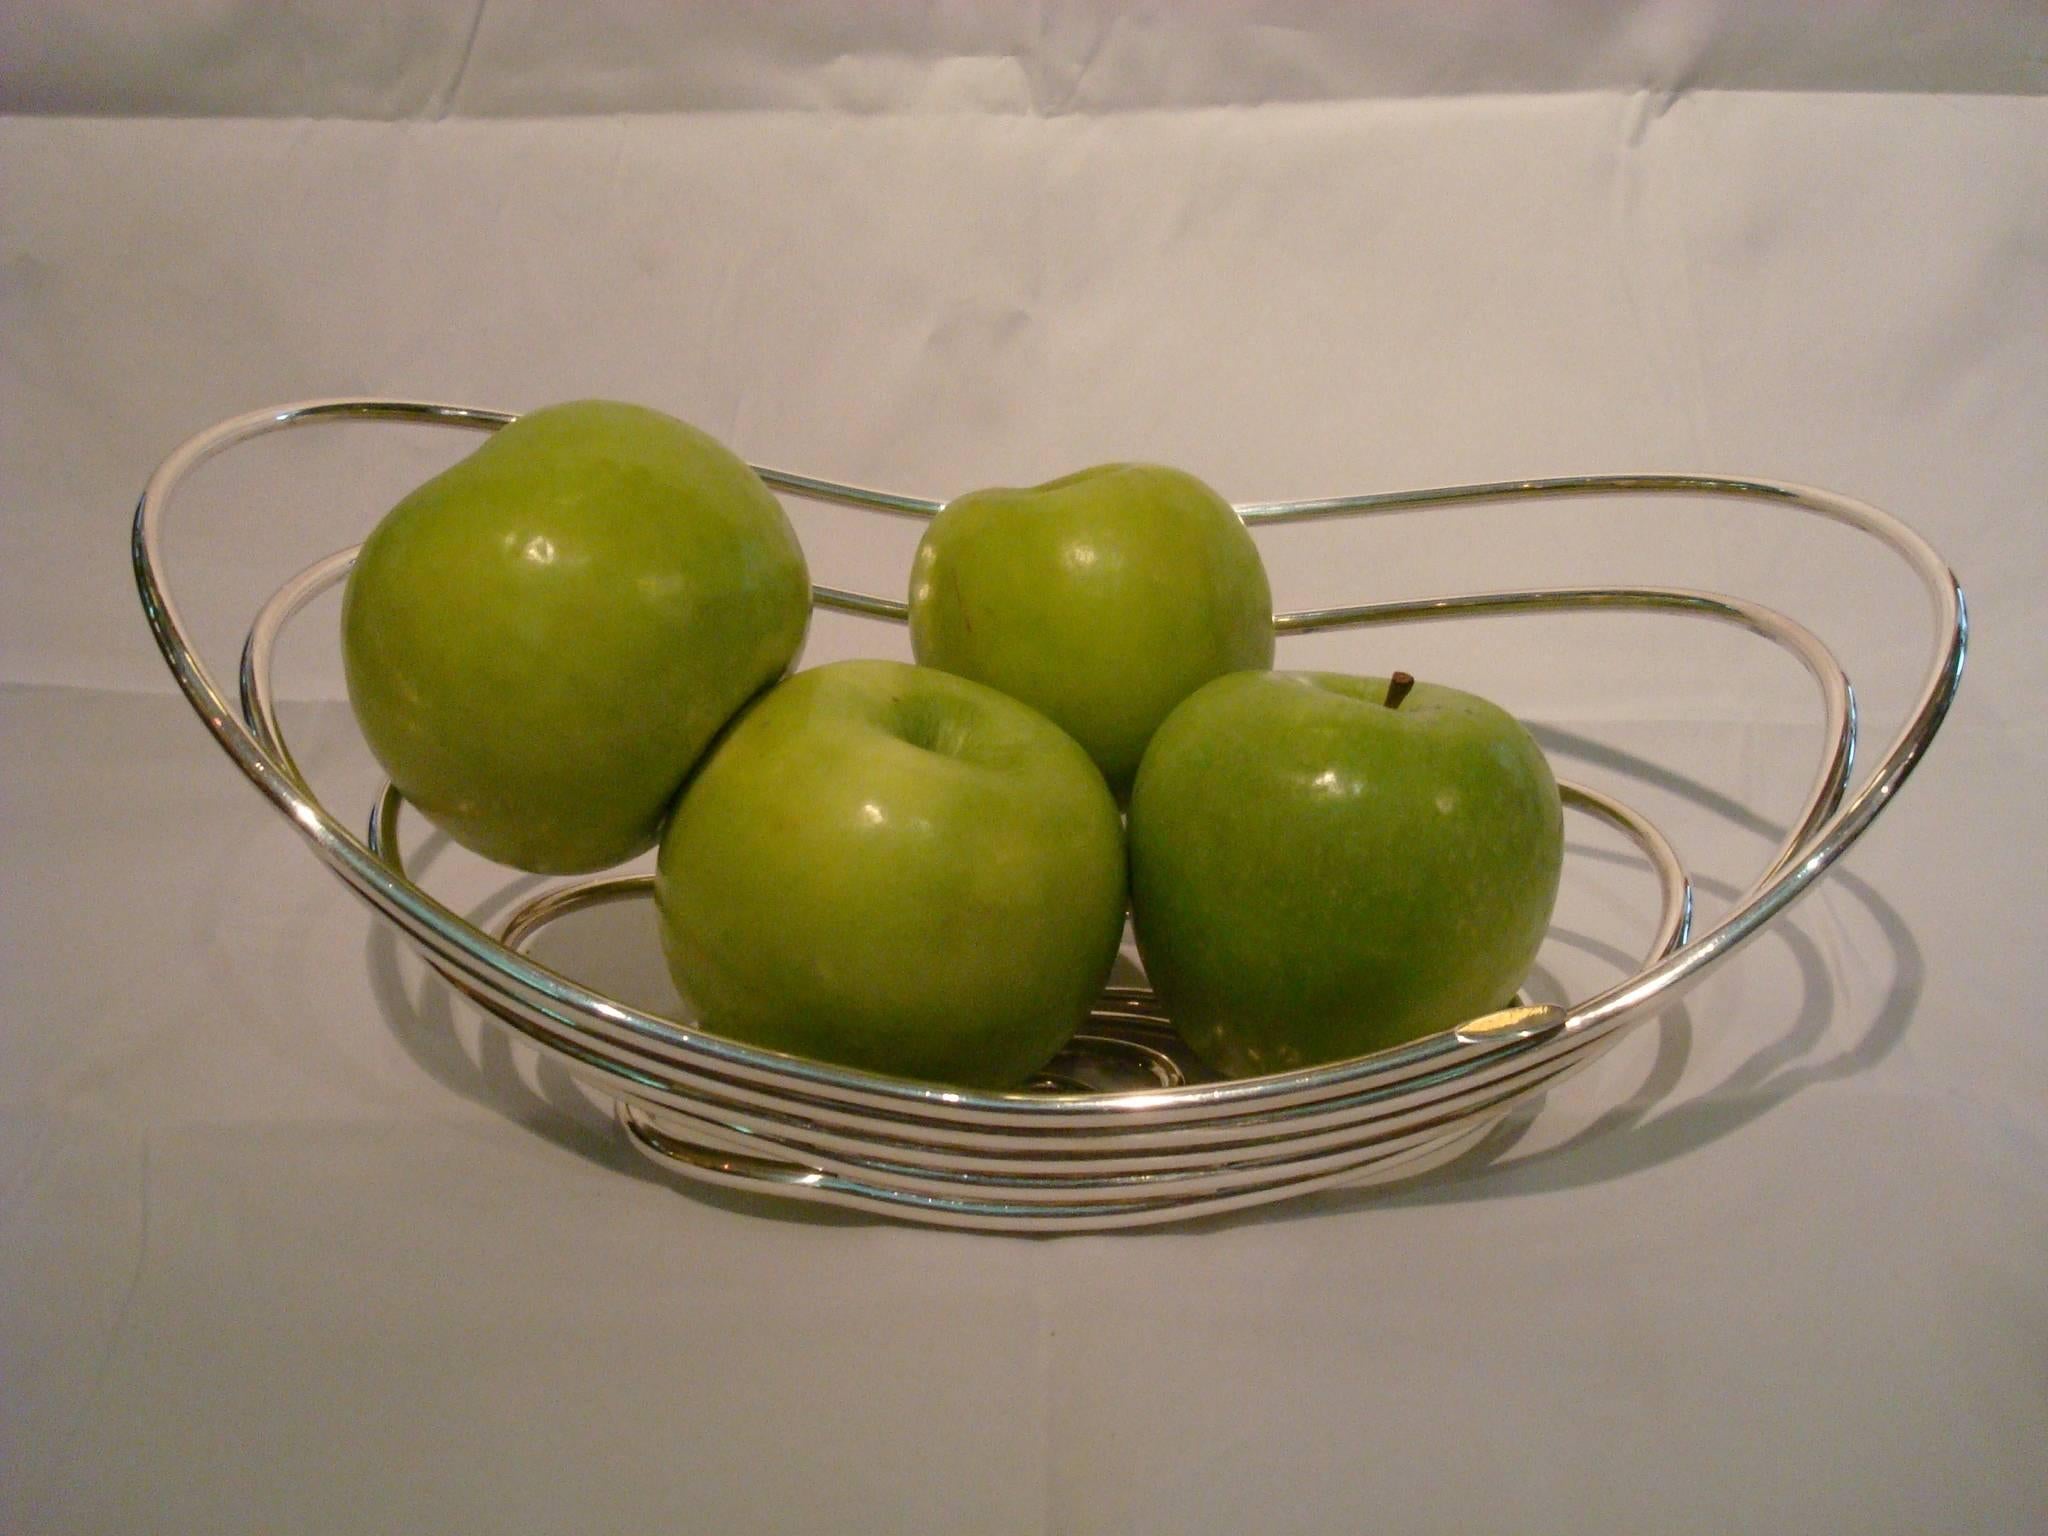 'Cesto' fruit bowl centerpiece by Lino Sabattini, Italy, 1964. Centerpiece by Lino Sabattini Seldom seen bowl from an innovative metalsmith. Silver plated brass. 13